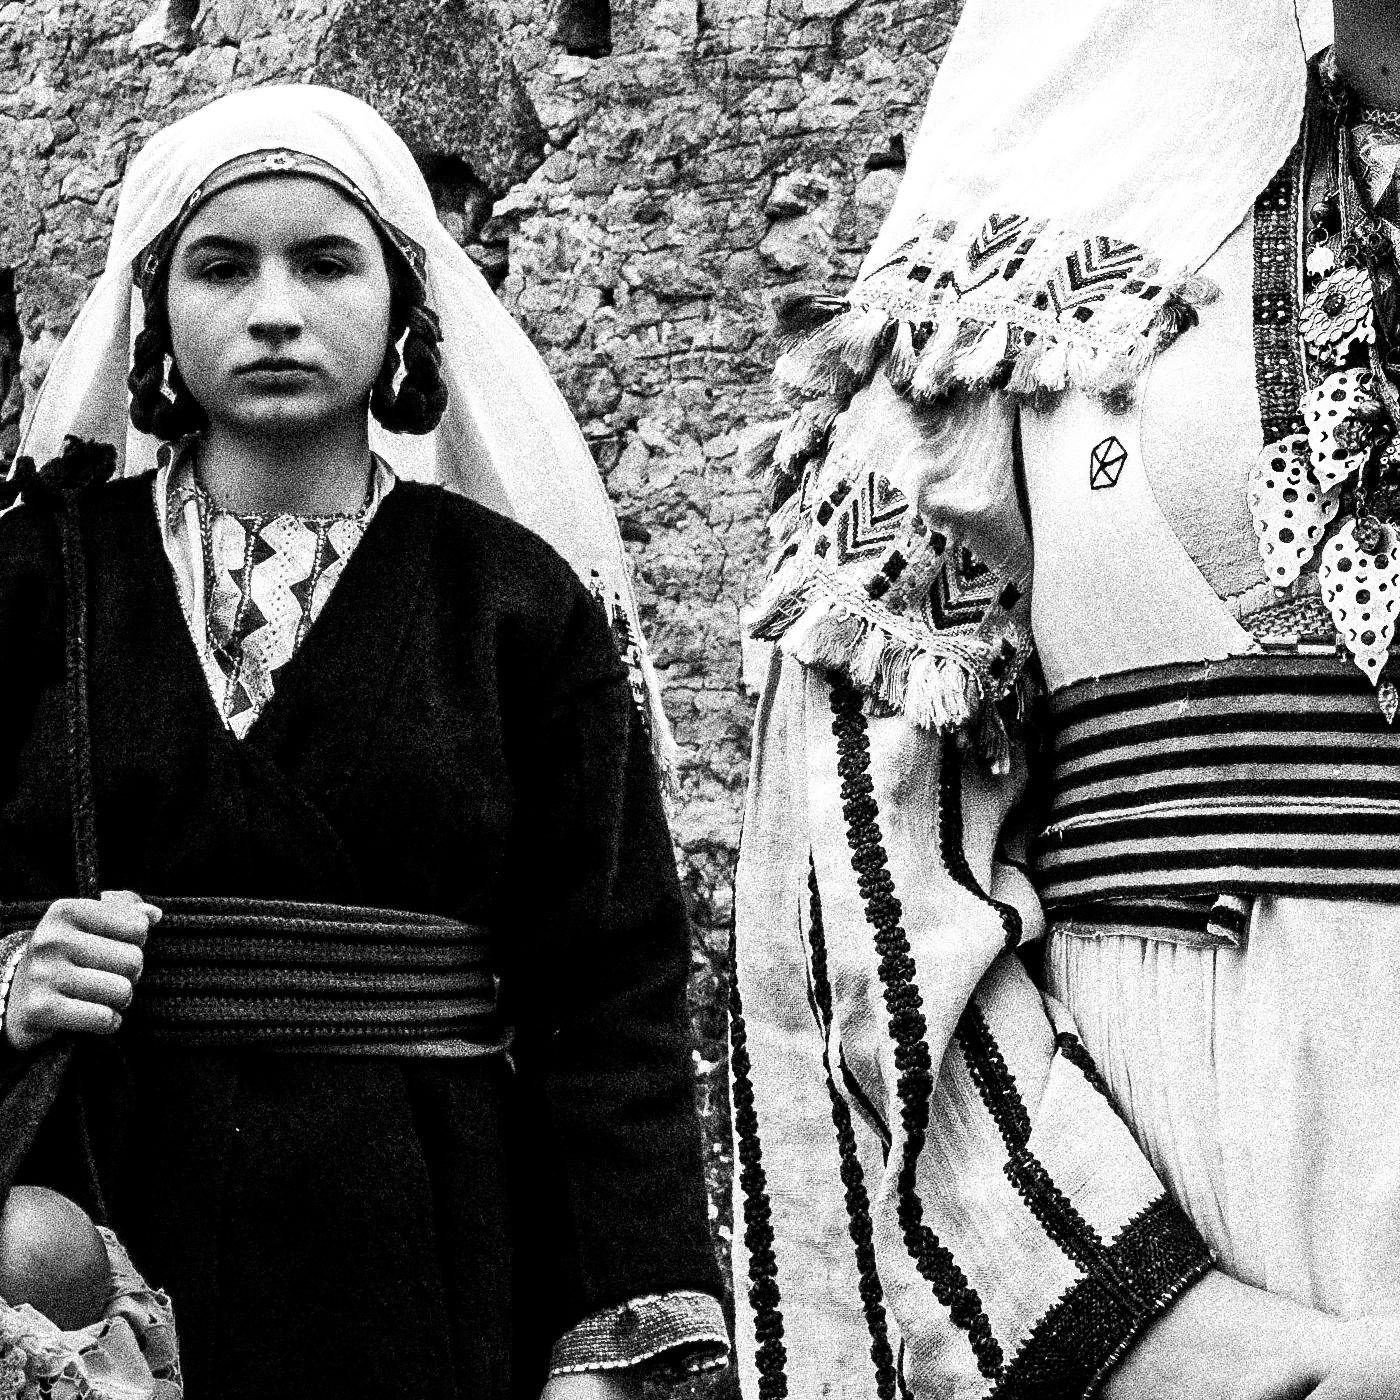 Black and White Photography Wall Art Greece | Costumes of Tilos island at Megalo Chorio Dodecanese Greece by George Tatakis - detailed view